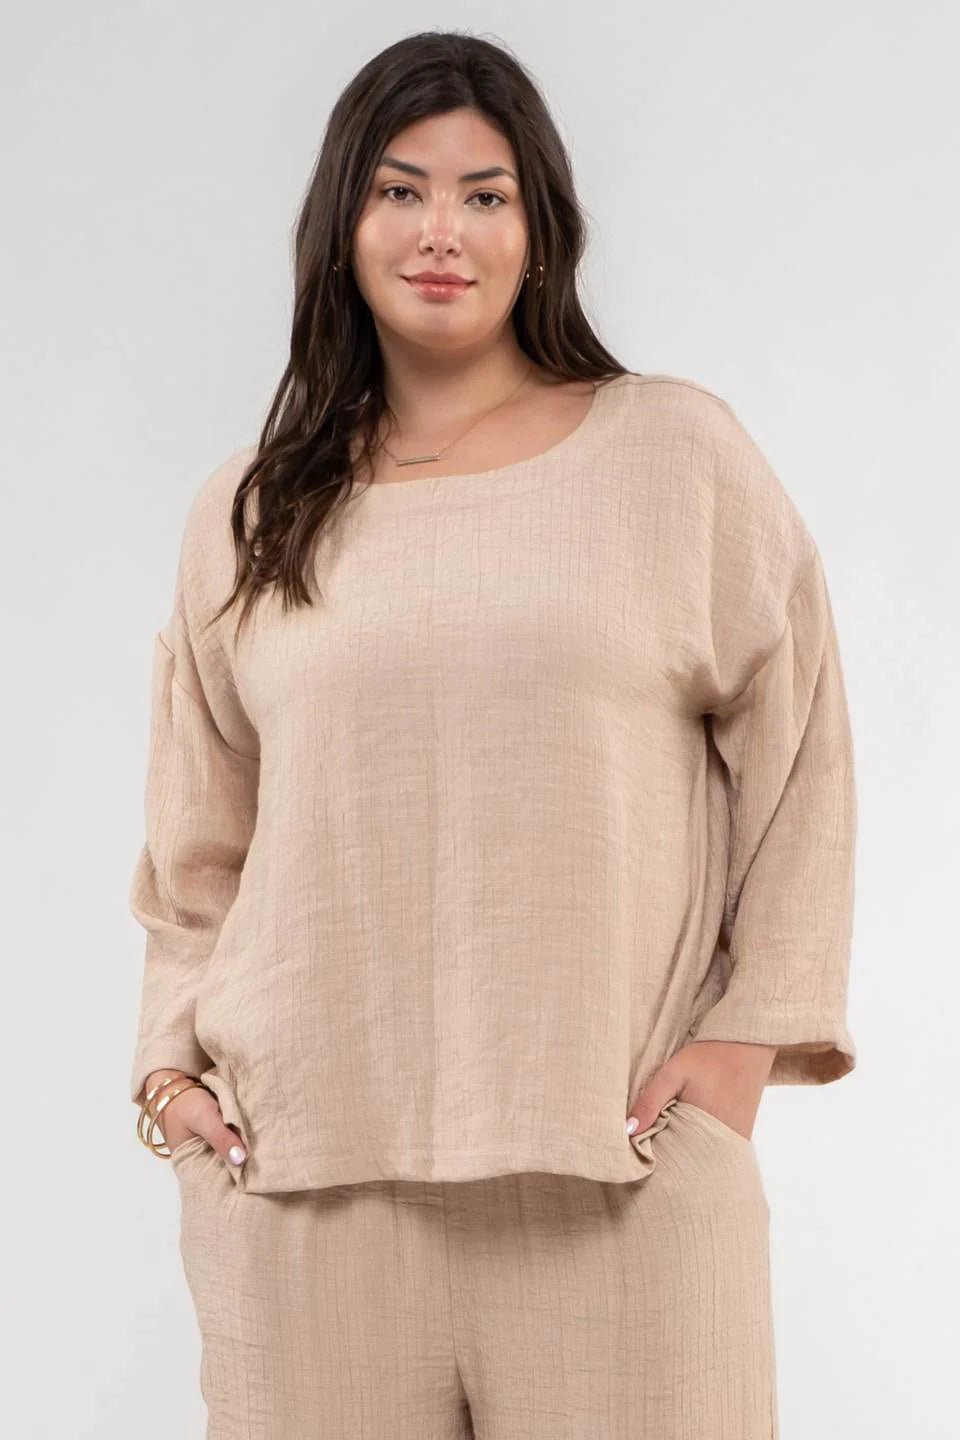 Relaxed 3/4 Sleeve Top - Modish Maven Boutique